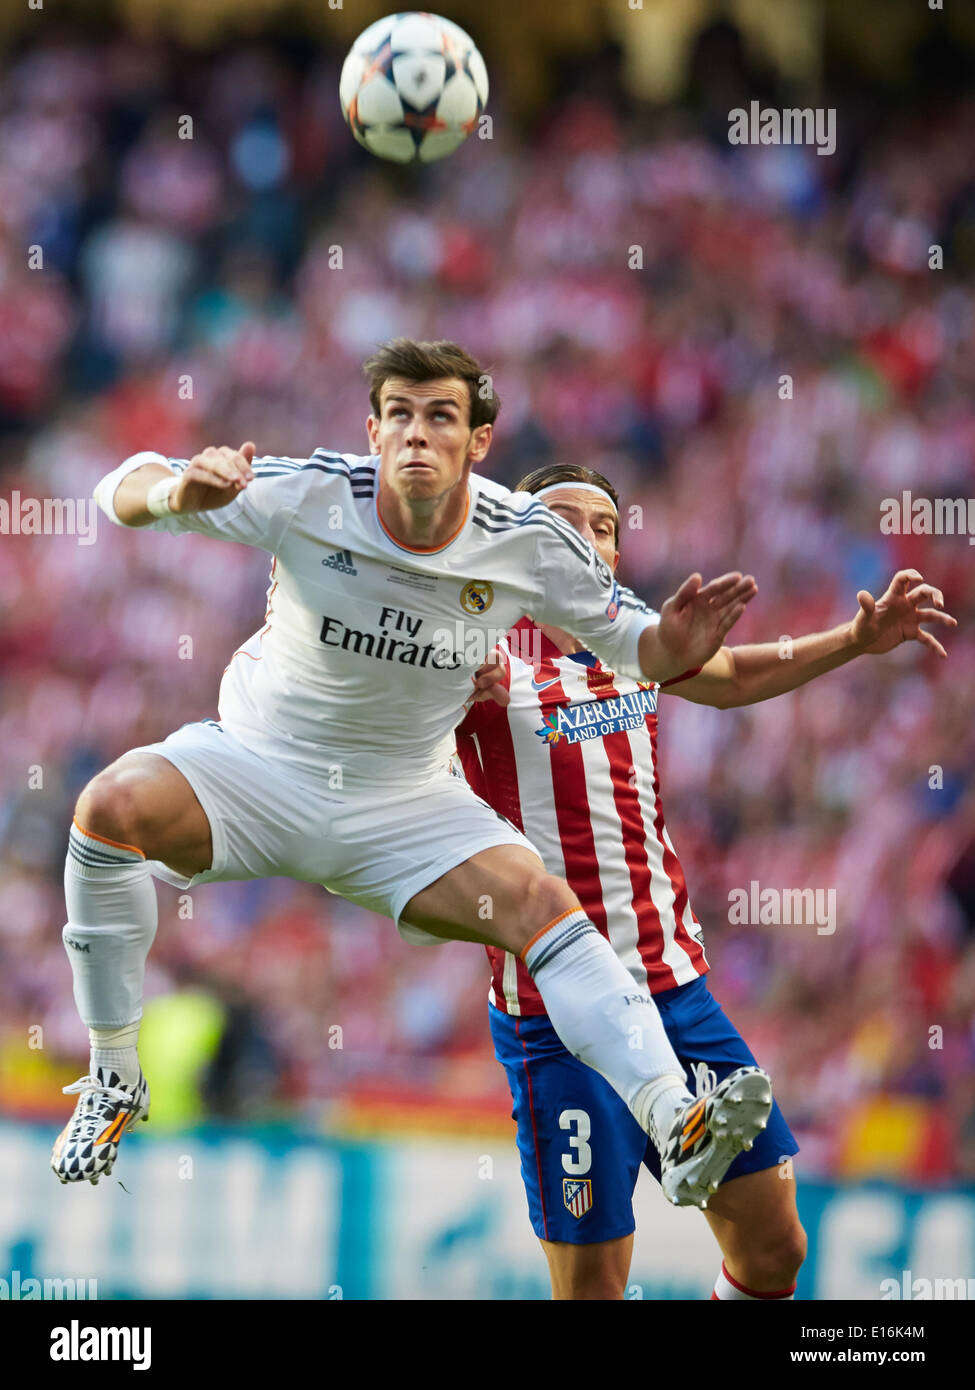 24.05.2014, Lisbon, Portugal. Midfielder Gareth Bale of Real Madrid challenges for a high ball with Defender Filipe Luis of Atletico Madrid during the UEFA Champions League final game between Real Madrid and Atletico Madrid at Sport Lisboa e Benfica Stadium, Lisbon, Portugal Stock Photo